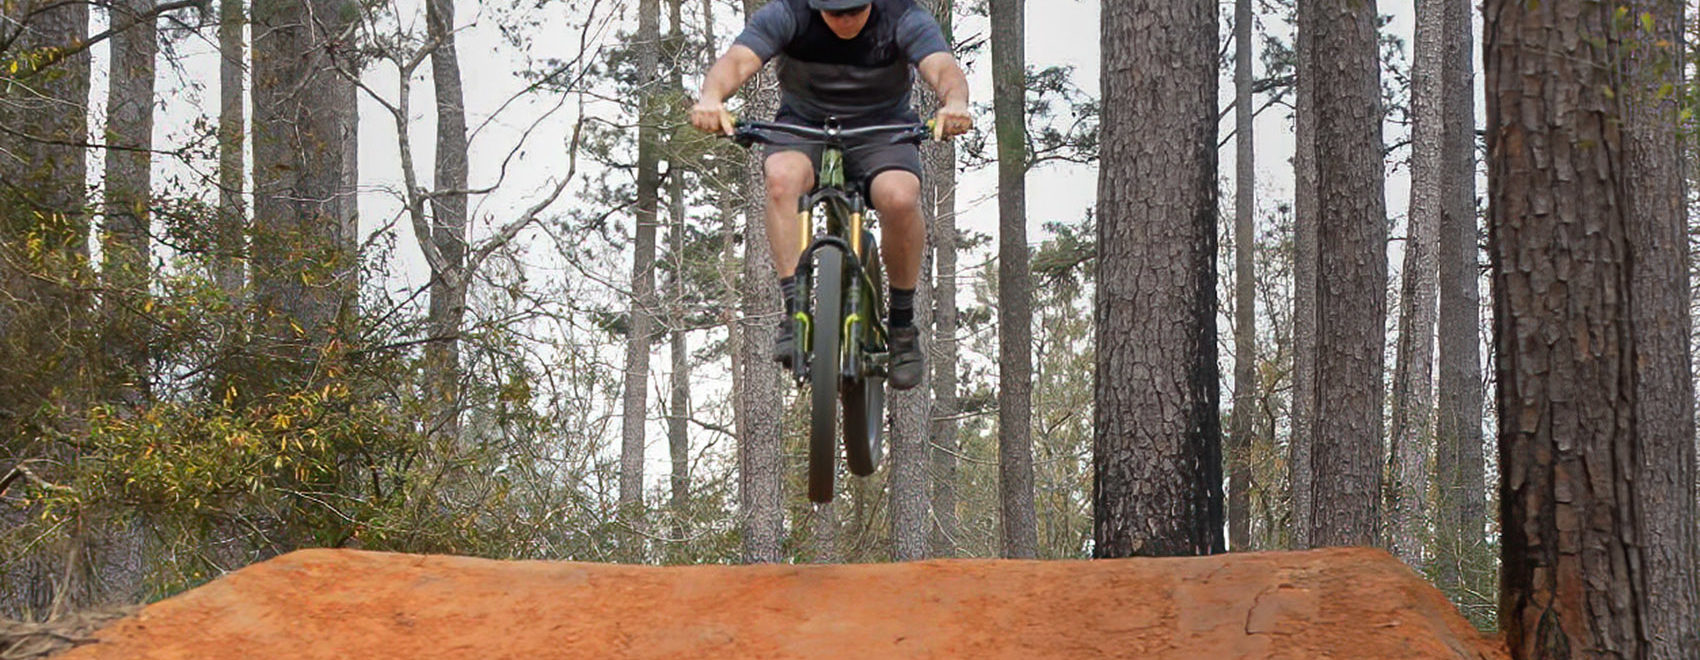 mountain bike jumps hill on bike trail in Bogue Chitto State Park Louisiana